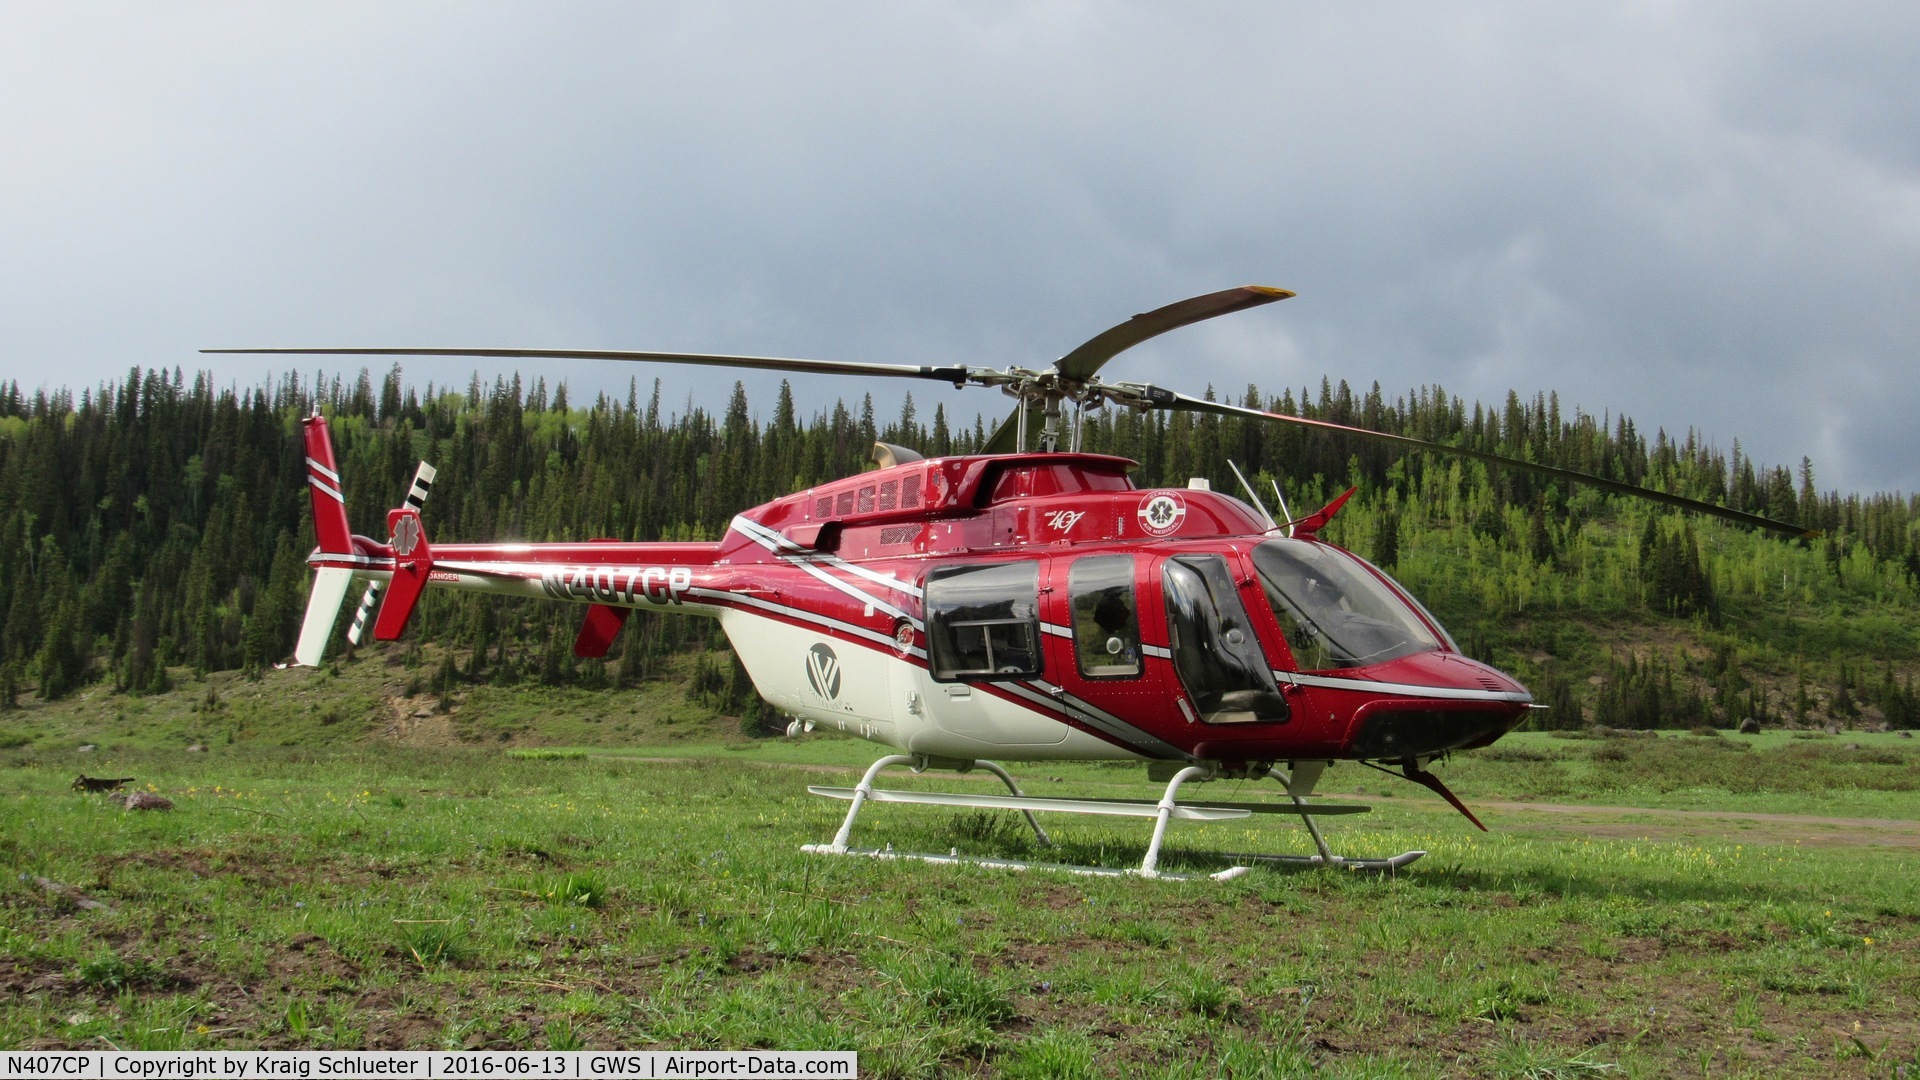 N407CP, 1997 Bell 407 C/N 53095, Bell 407 in HEMS configuration for Classic Air Medical in Glenwood Springs Colorado